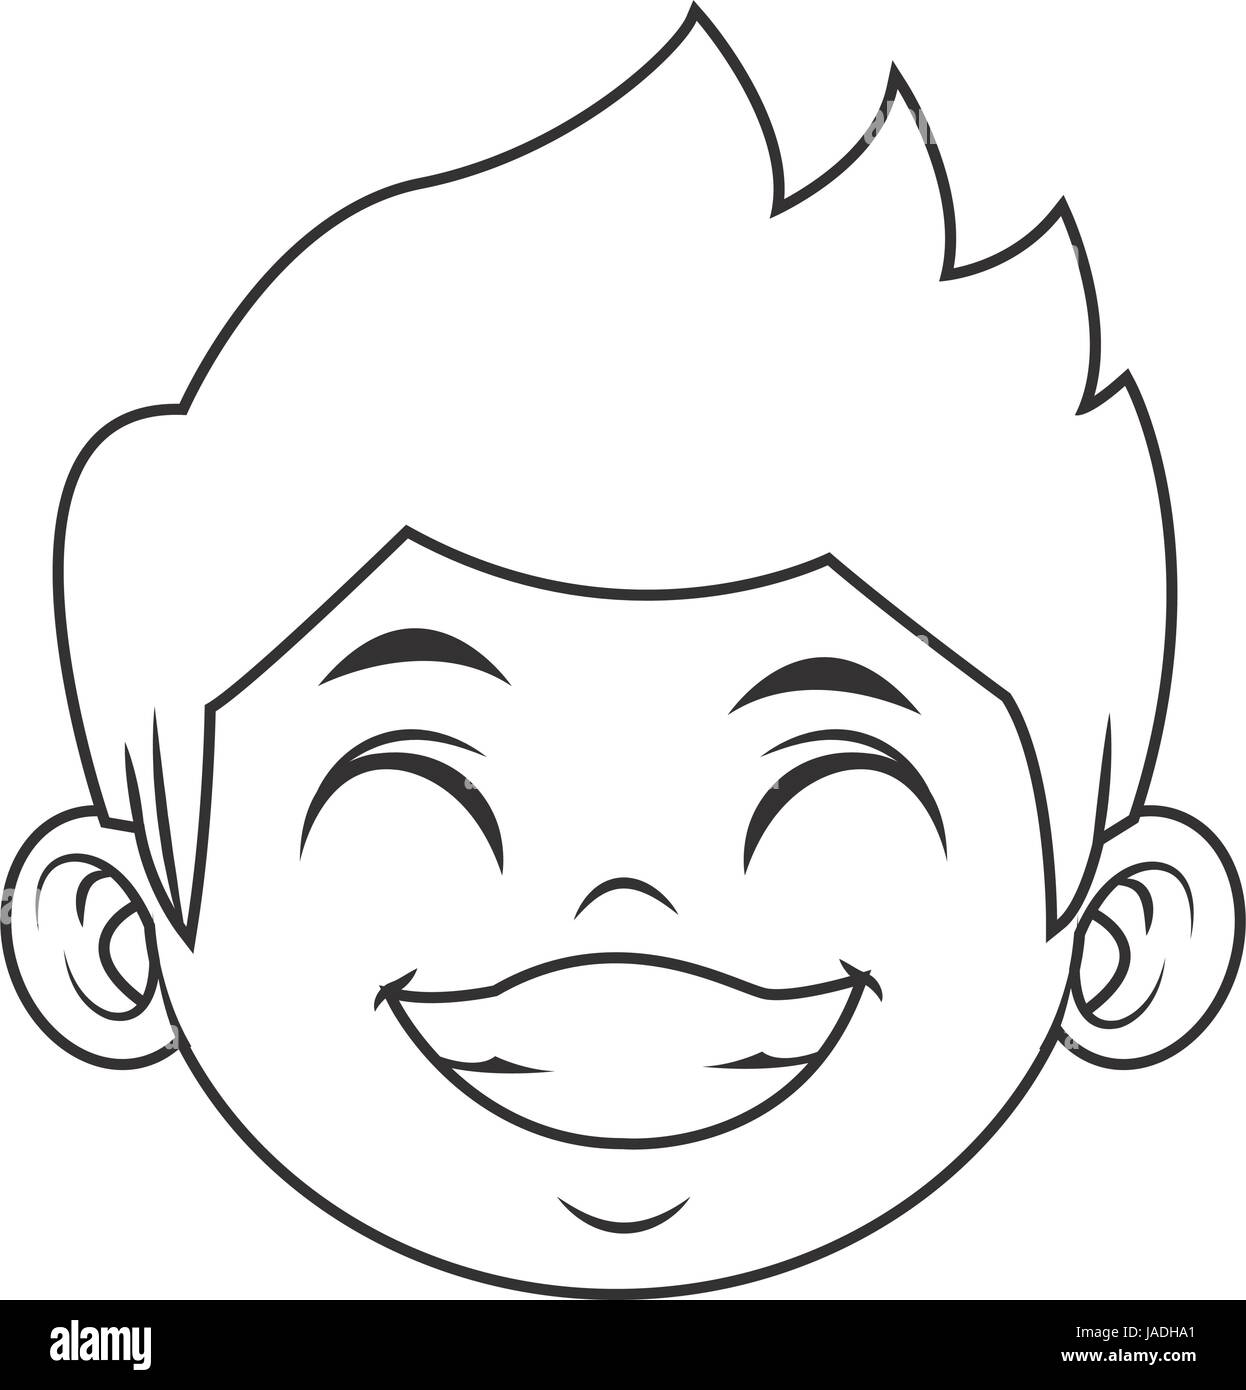 Cute Little Boy Drawing Black And White Stock Photos Images Alamy Jump to navigation jump to search. https www alamy com stock photo beautiful little face boy cute child smiling 144128489 html